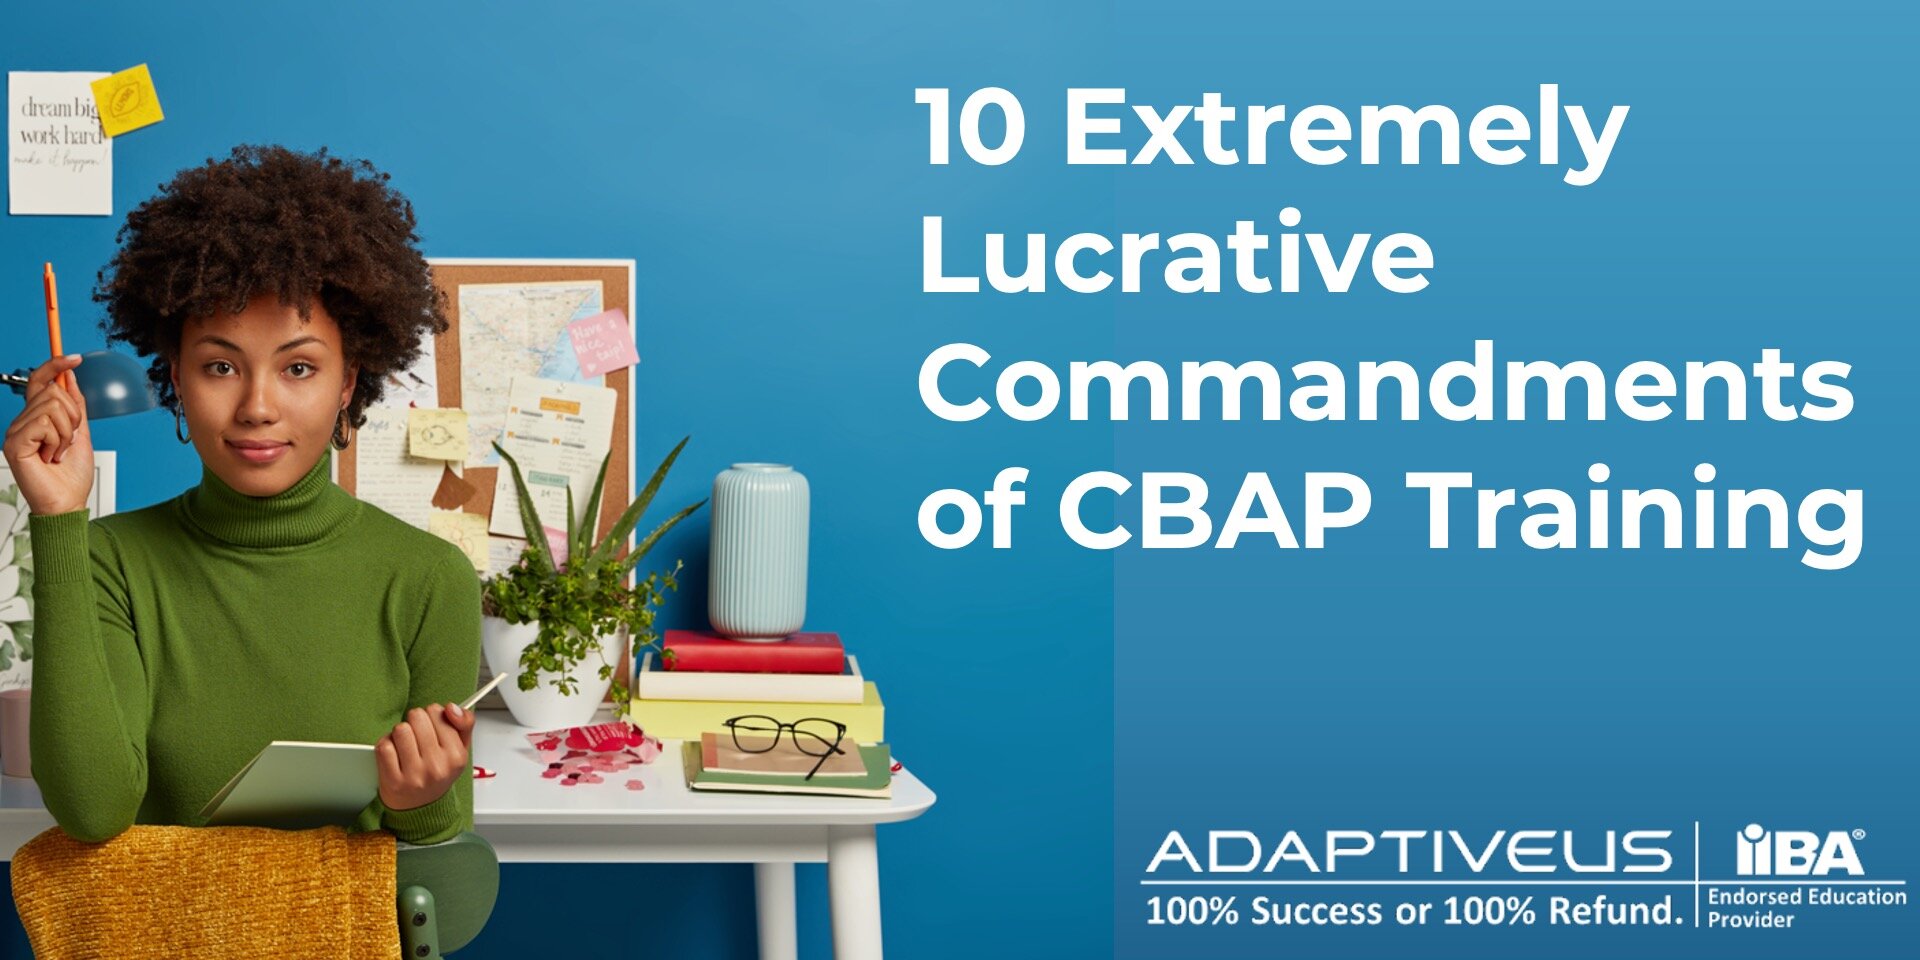 10 Extremely Lucrative Commandments of CBAP Training